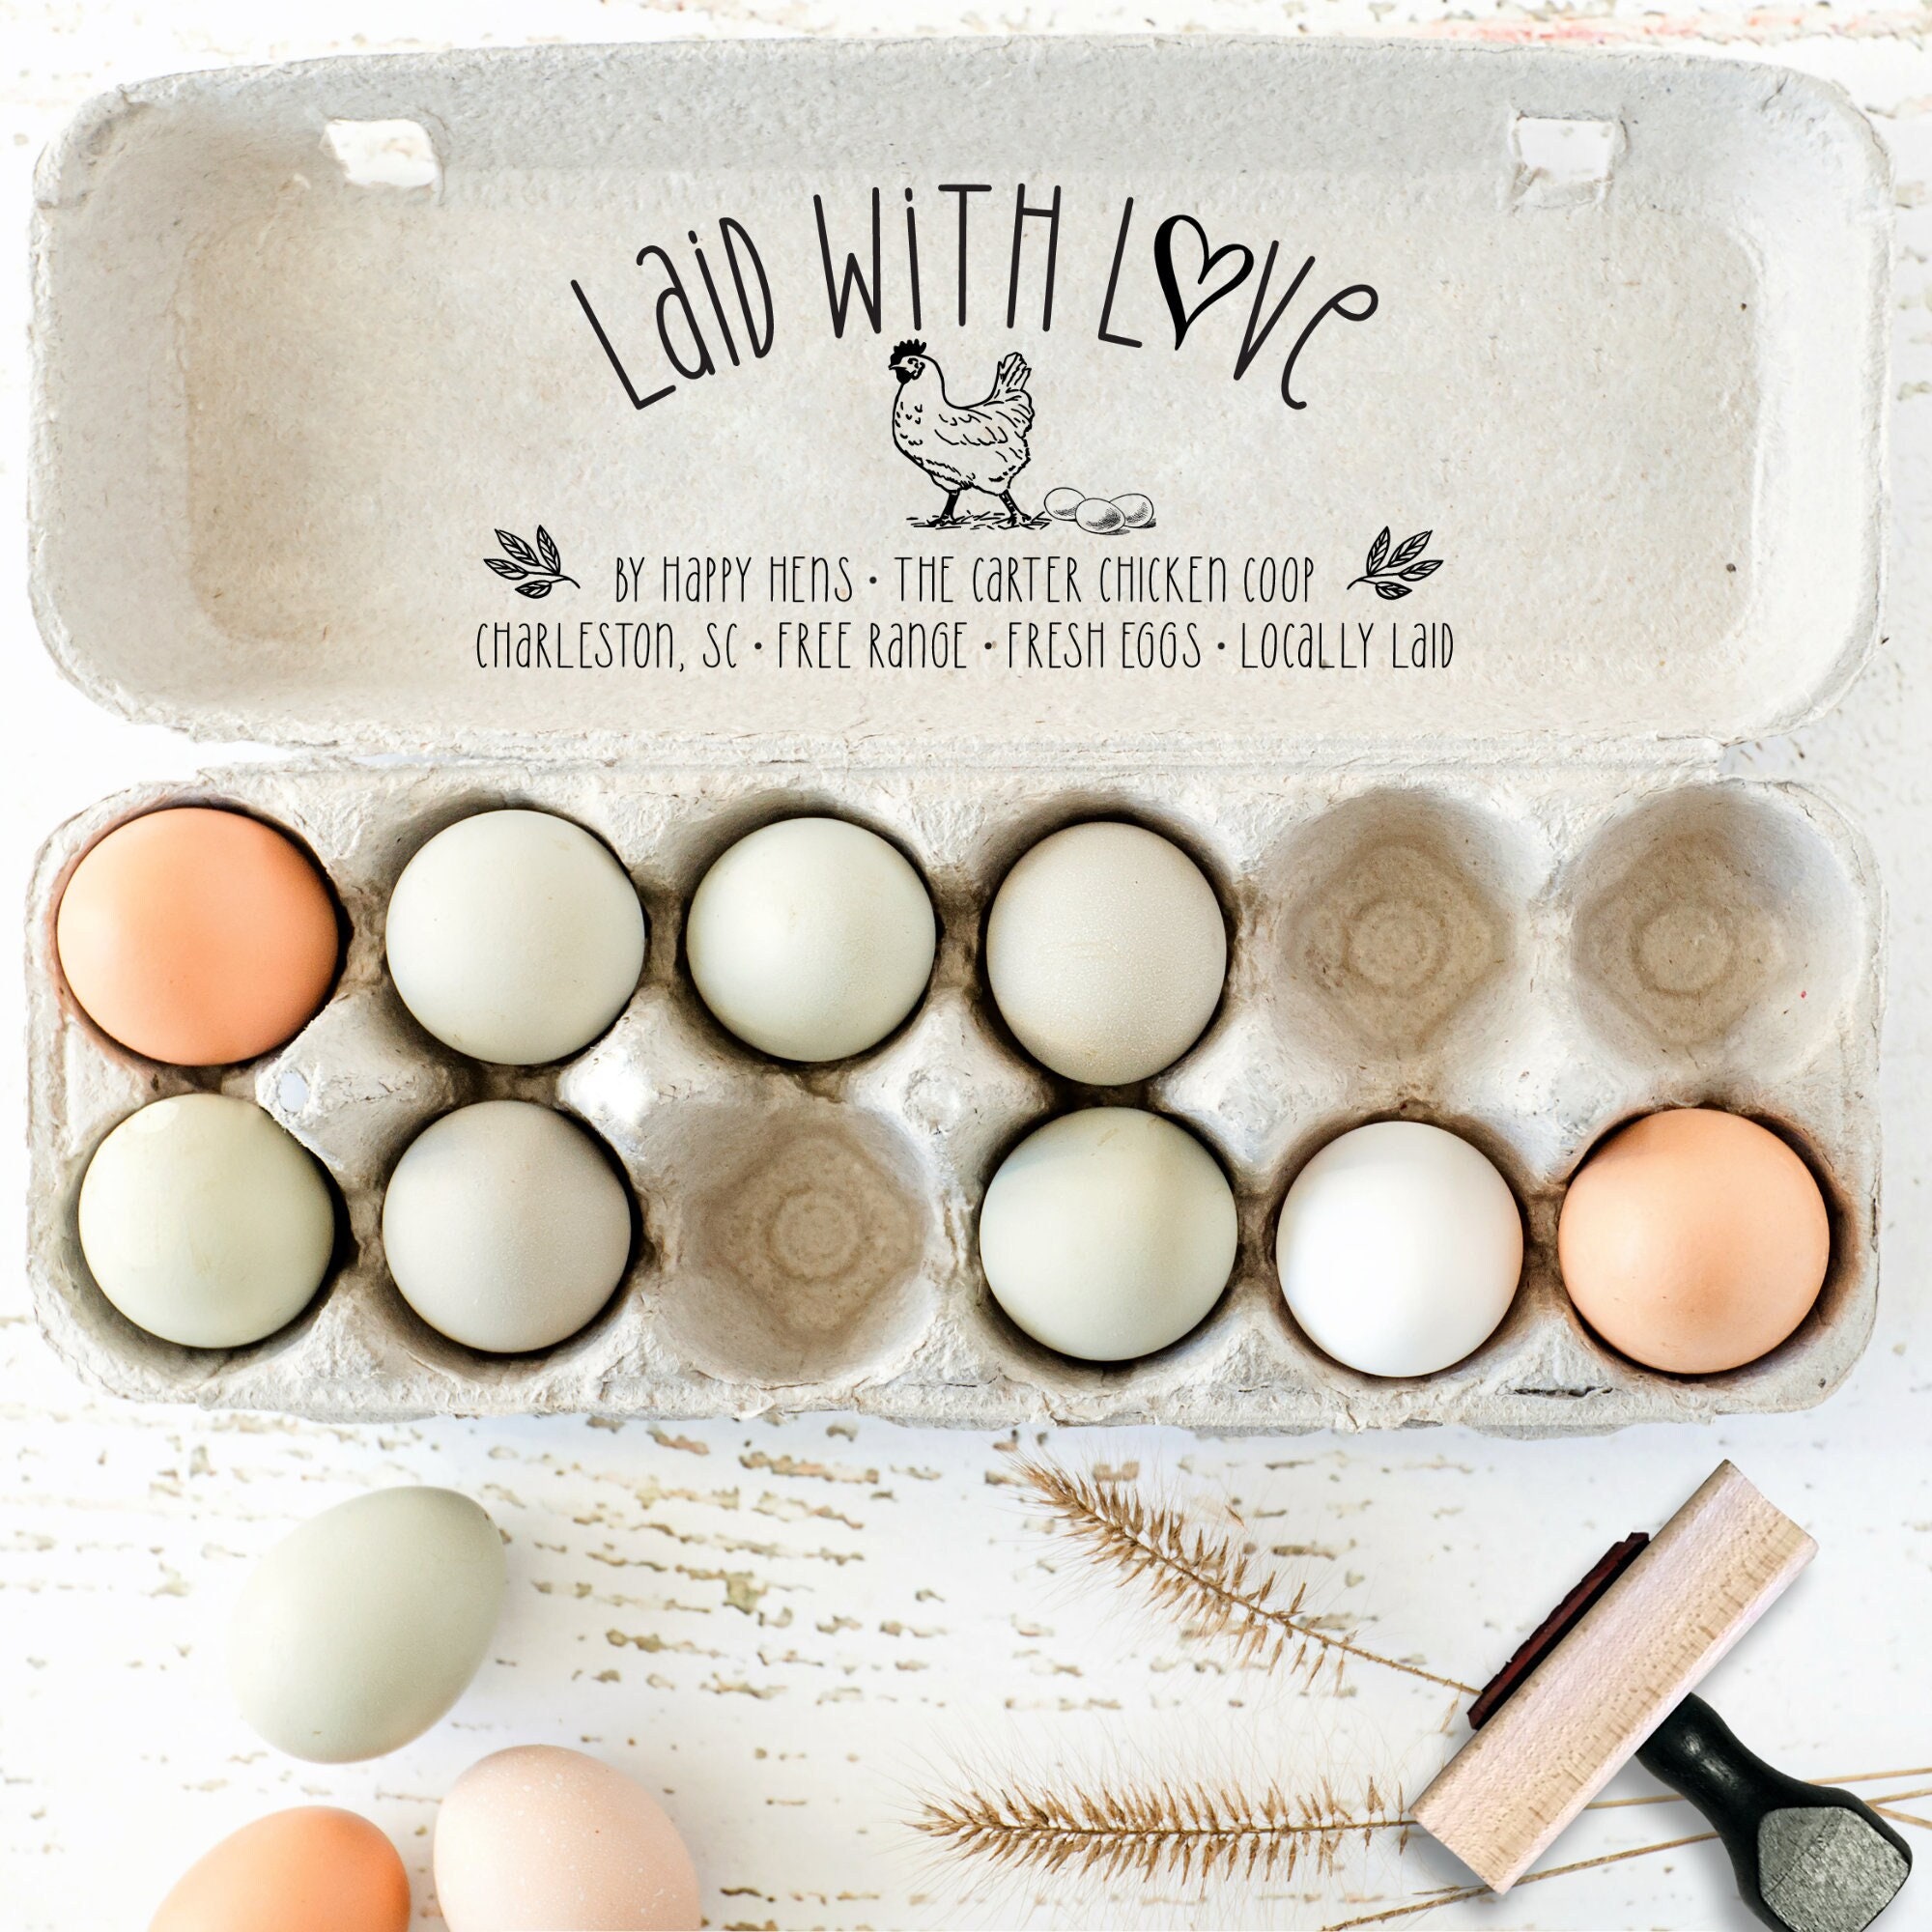 Chicken Egg Stamps, Chicken Lady Gift, Farm Fresh Eggs Rubber Stamper,  Farmhouse Hostess Gift With Cute Egg Sayings, Farm Gift Idea 